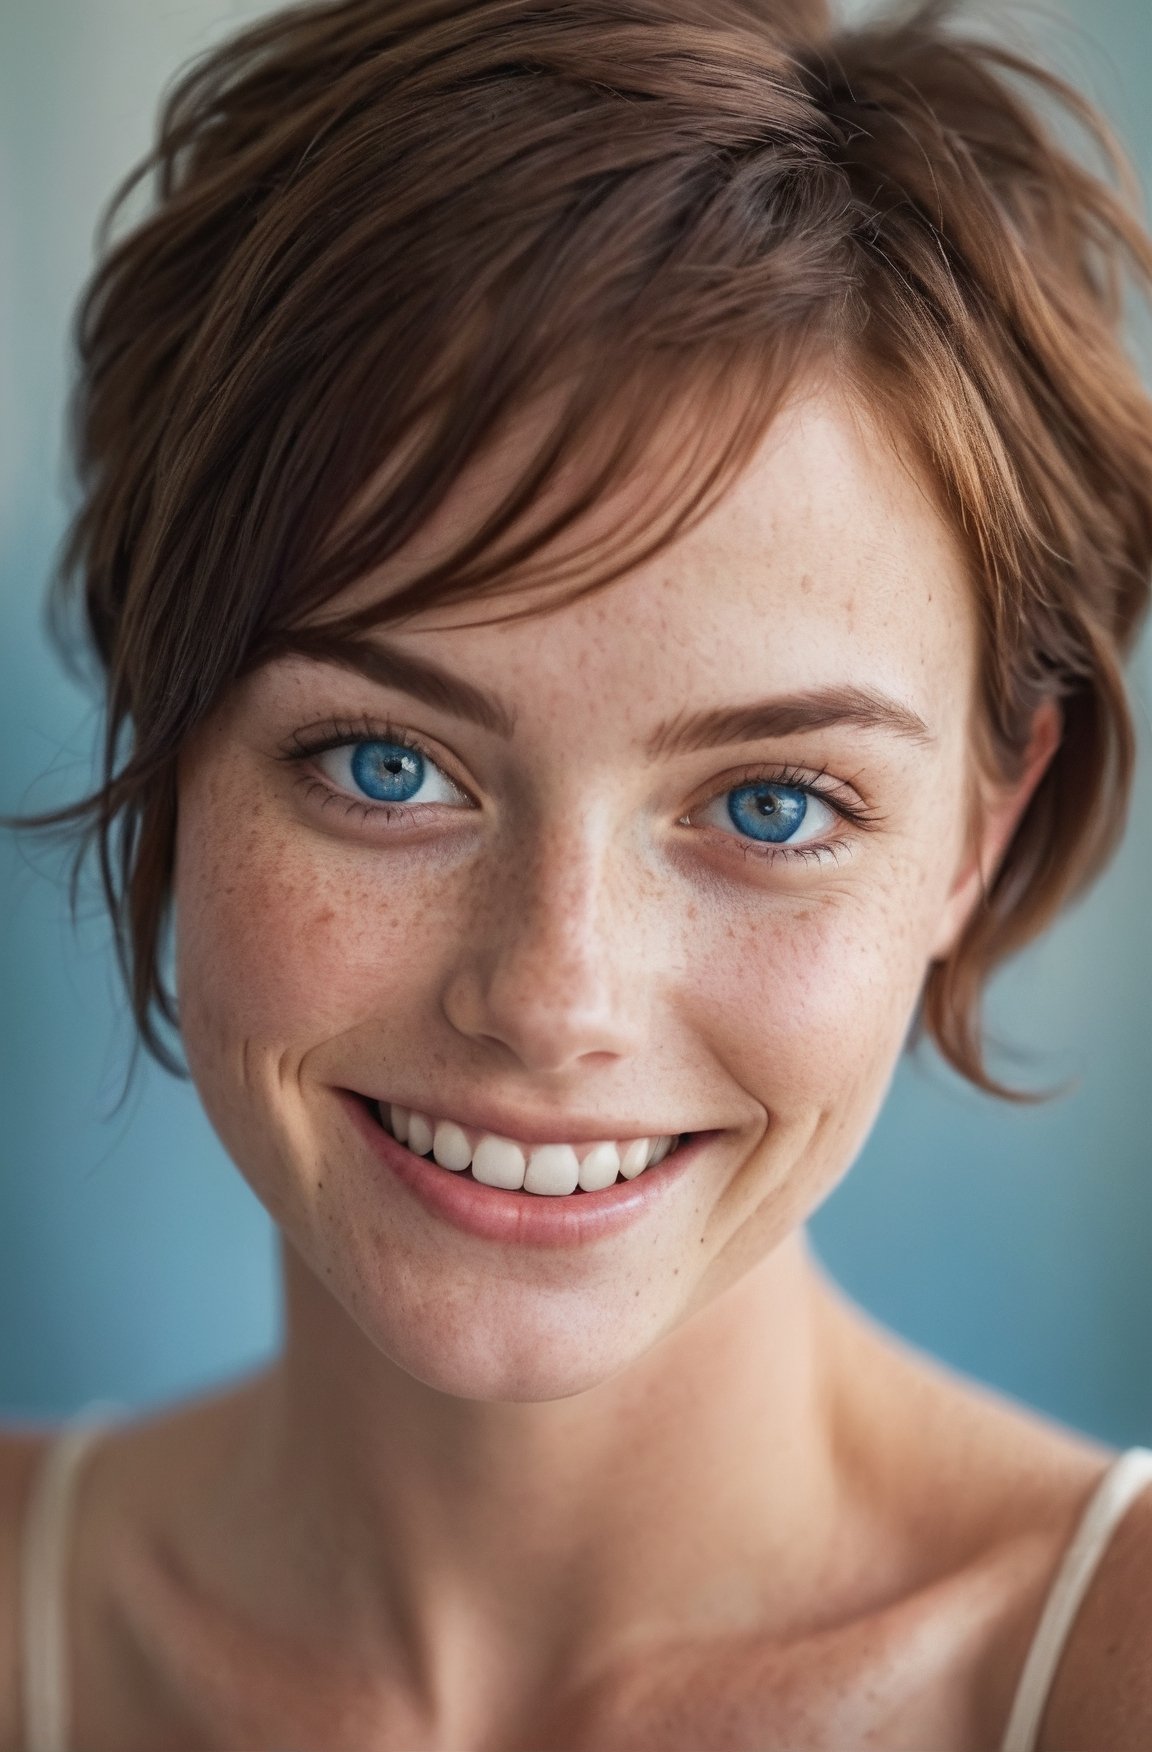 beautiful lady, (freckles), big smile, blue eyes, short hair, dark makeup, hyperdetailed photography, soft light, head and shoulders portrait, cover,DonMD3m0nXL 